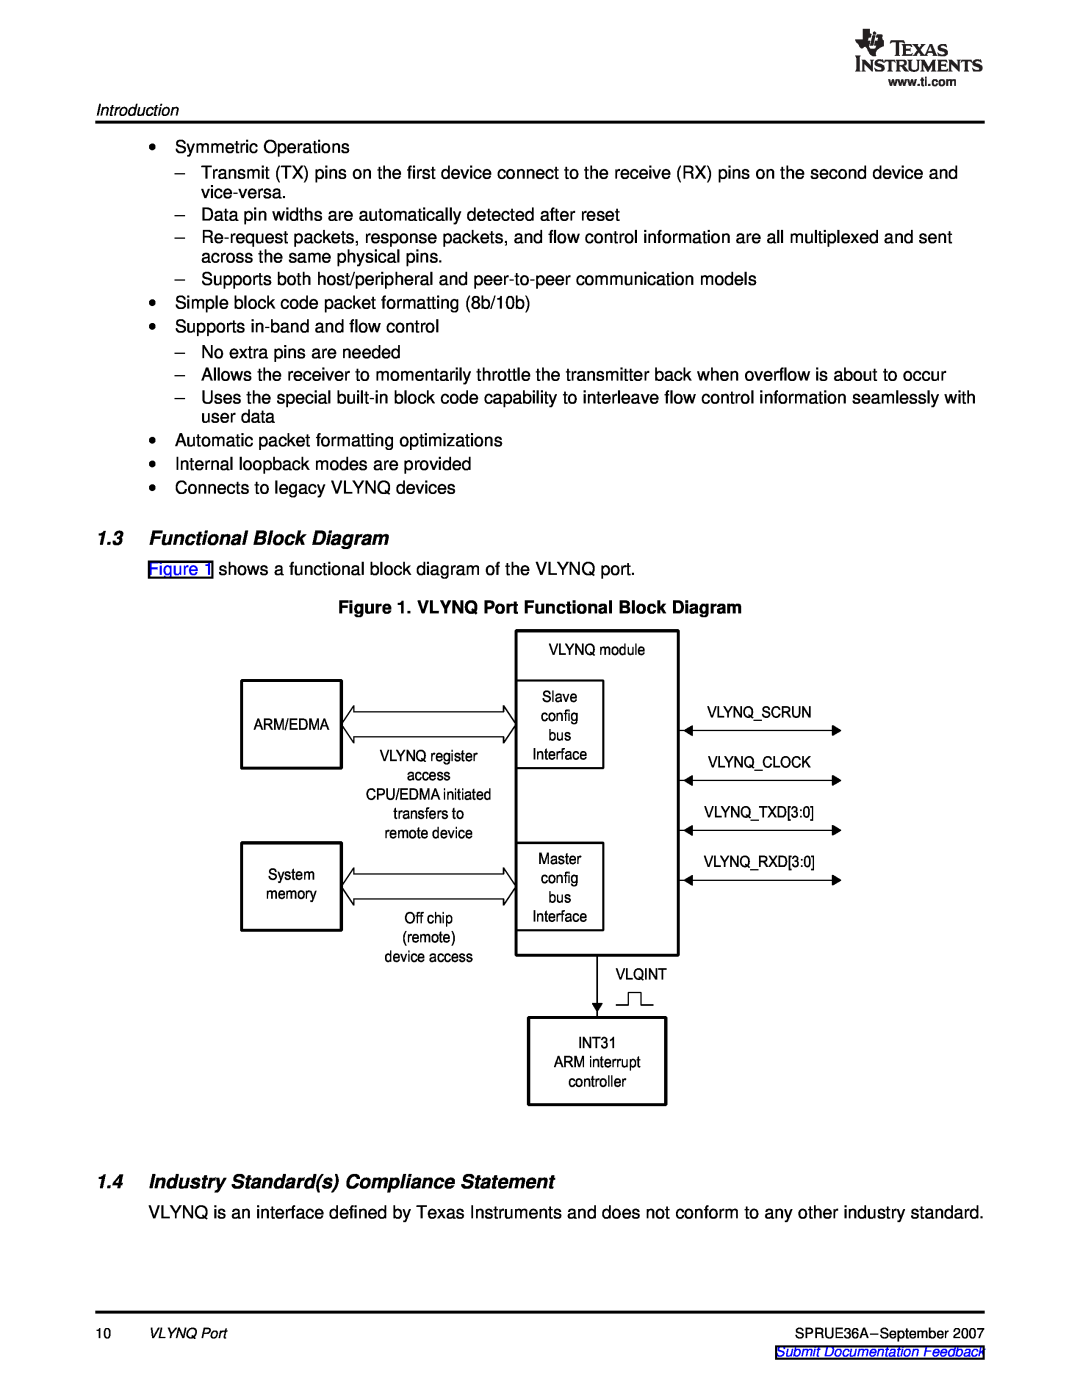 Texas Instruments VLYNQ Port manual Functional Block Diagram, Industry Standards Compliance Statement 